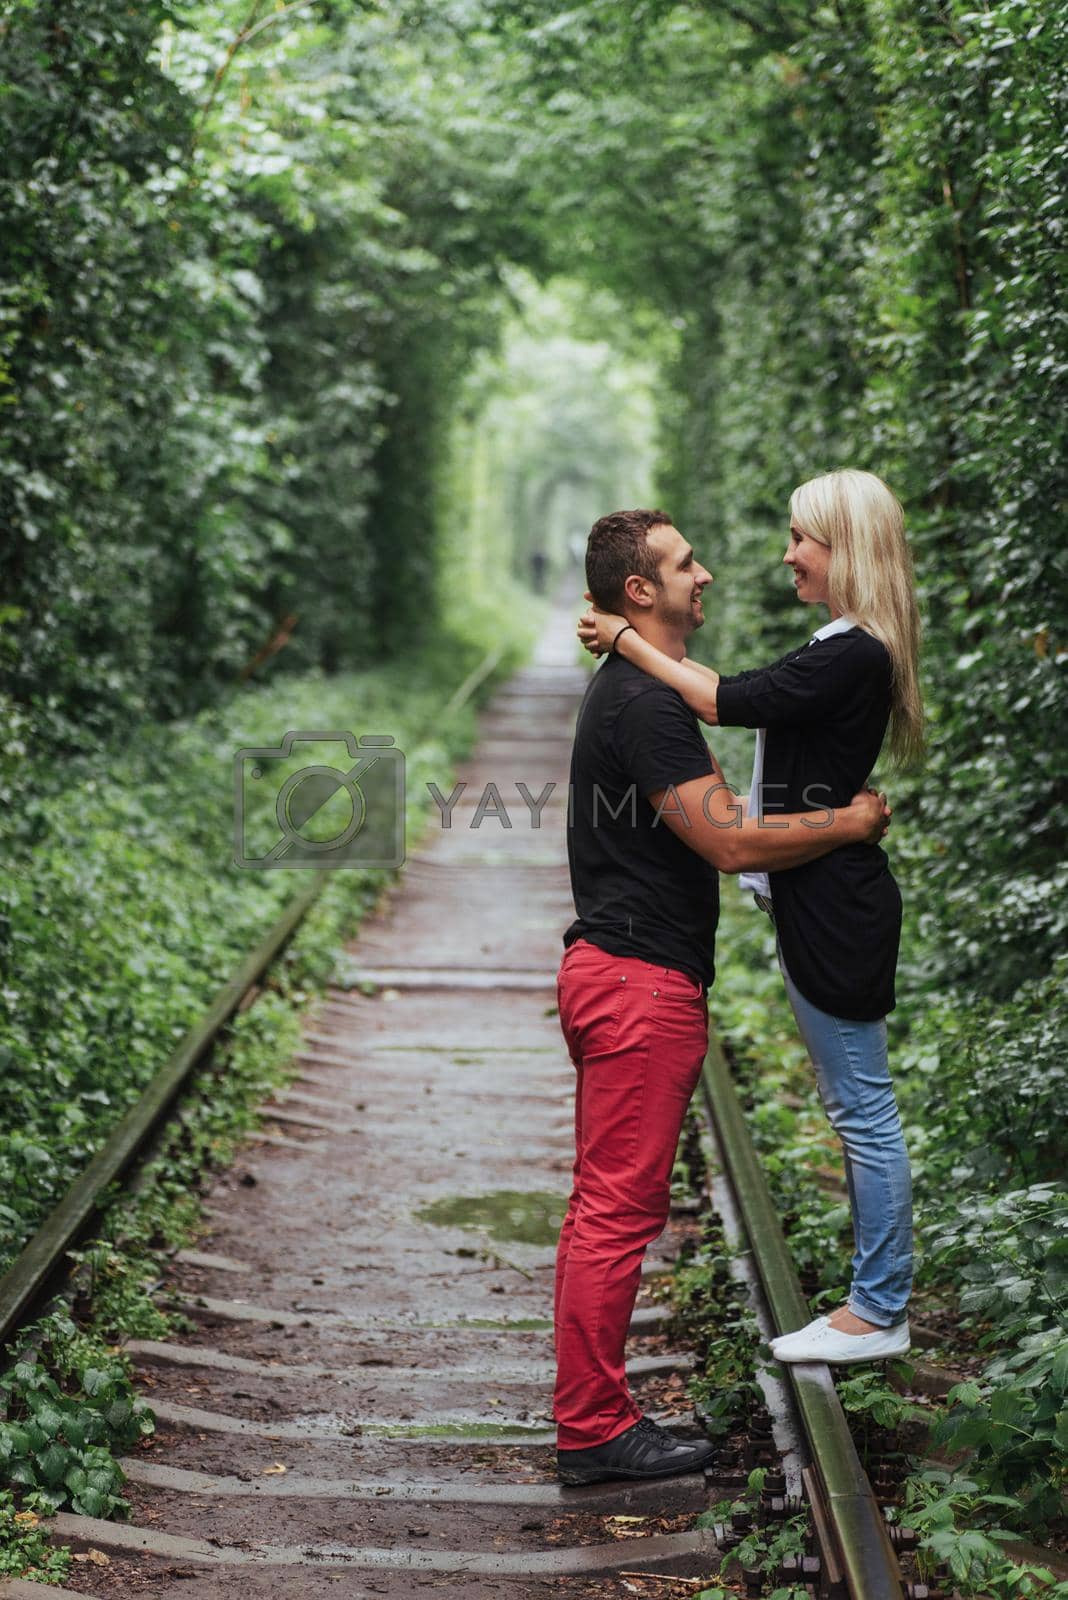 Royalty free image of Loving couple on the iron road. Ukraine. by Standret